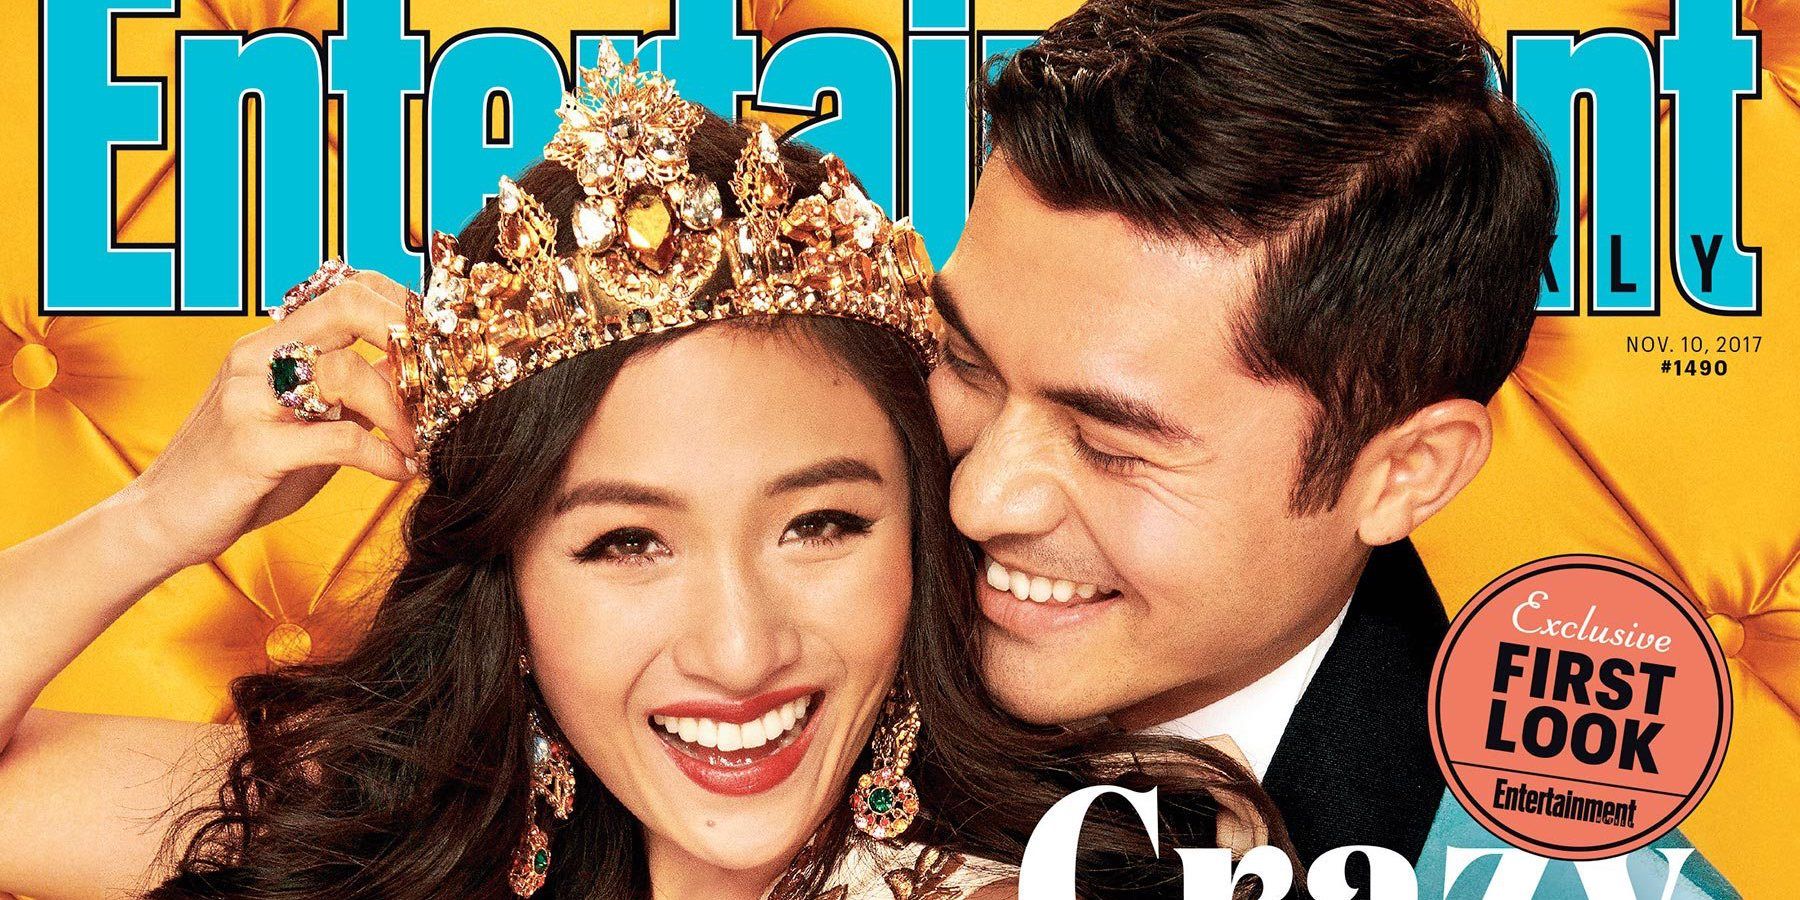 Crazy Rich Asians Gets A First Look EW Cover Screen Rant